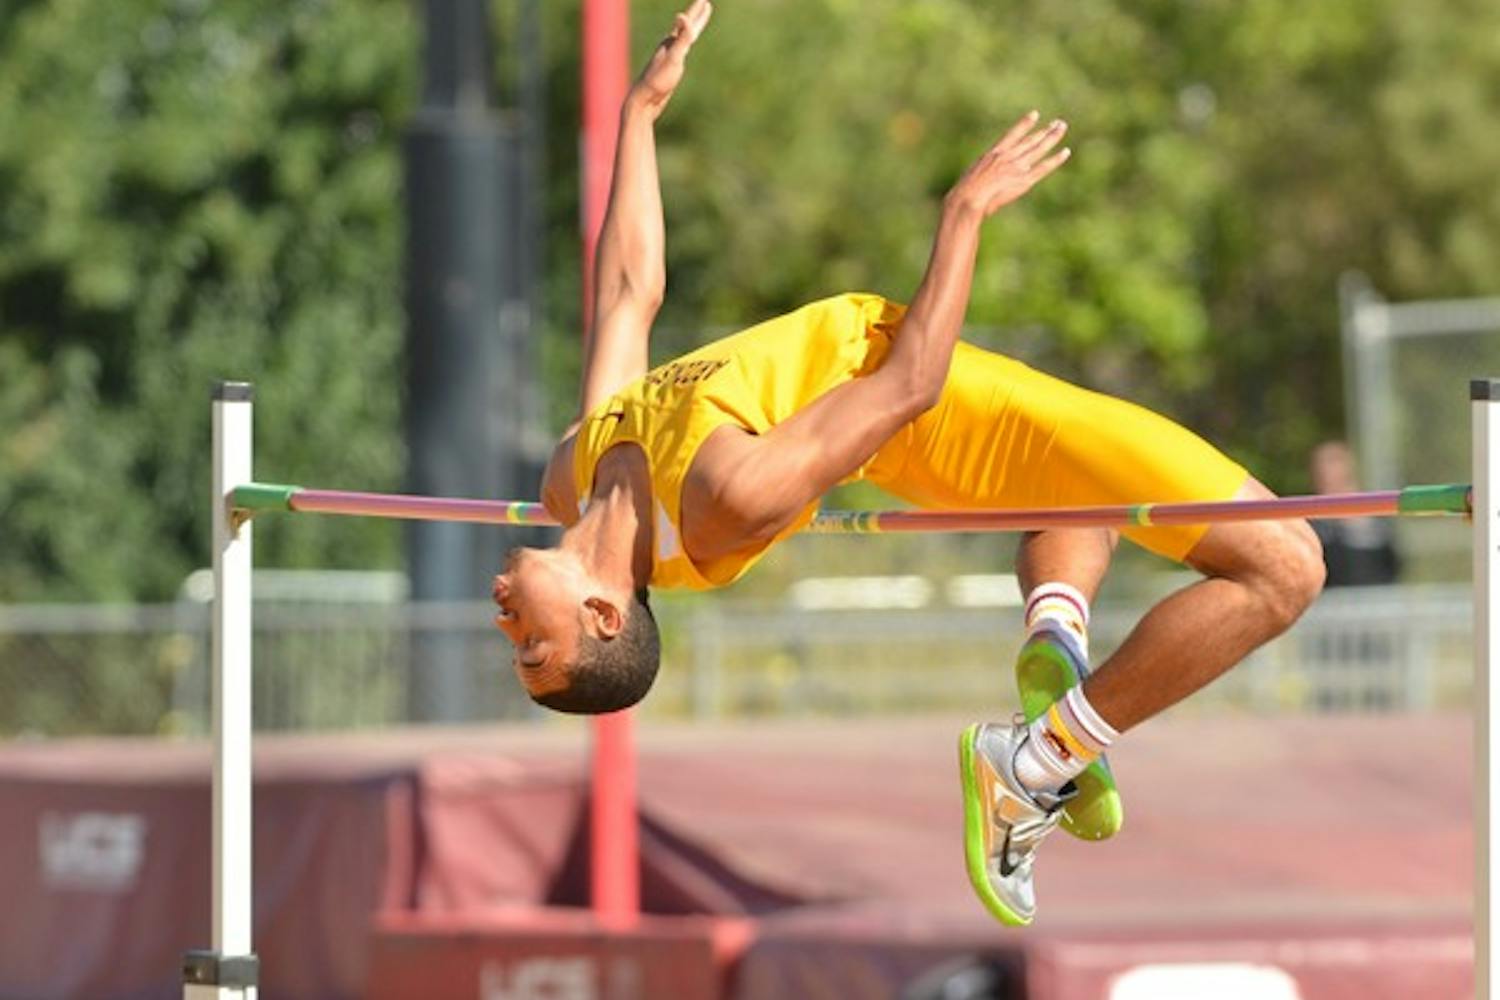 High marks: ASU freshman Bryan McBride arches over the bar during the high jump competition at the ASU Invitational on Saturday. McBride finished second in the high jump with a height of 2.1 meters. (Photo by Aaron Lavinsky)